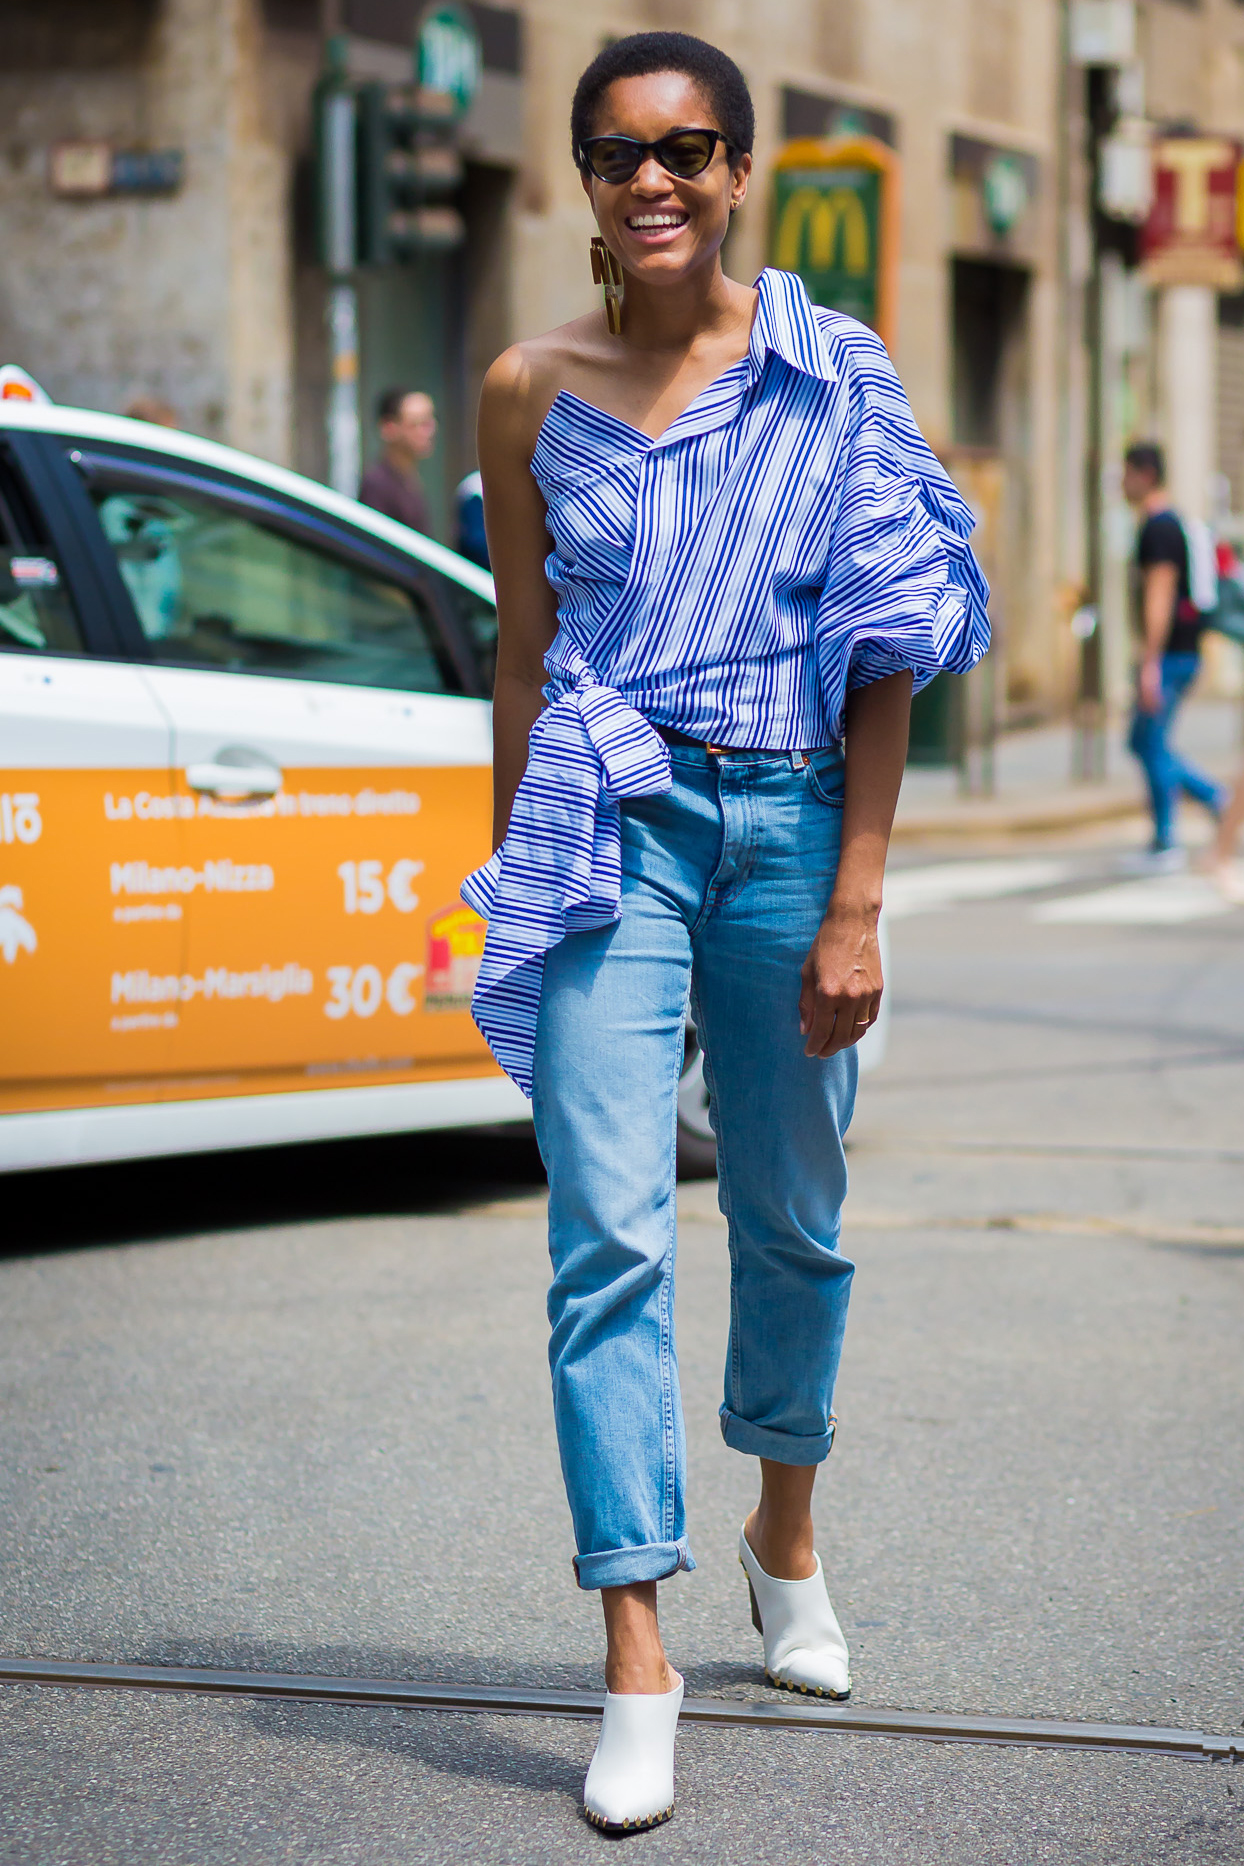 20 All-Blue Outfits to Try | Who What Wear